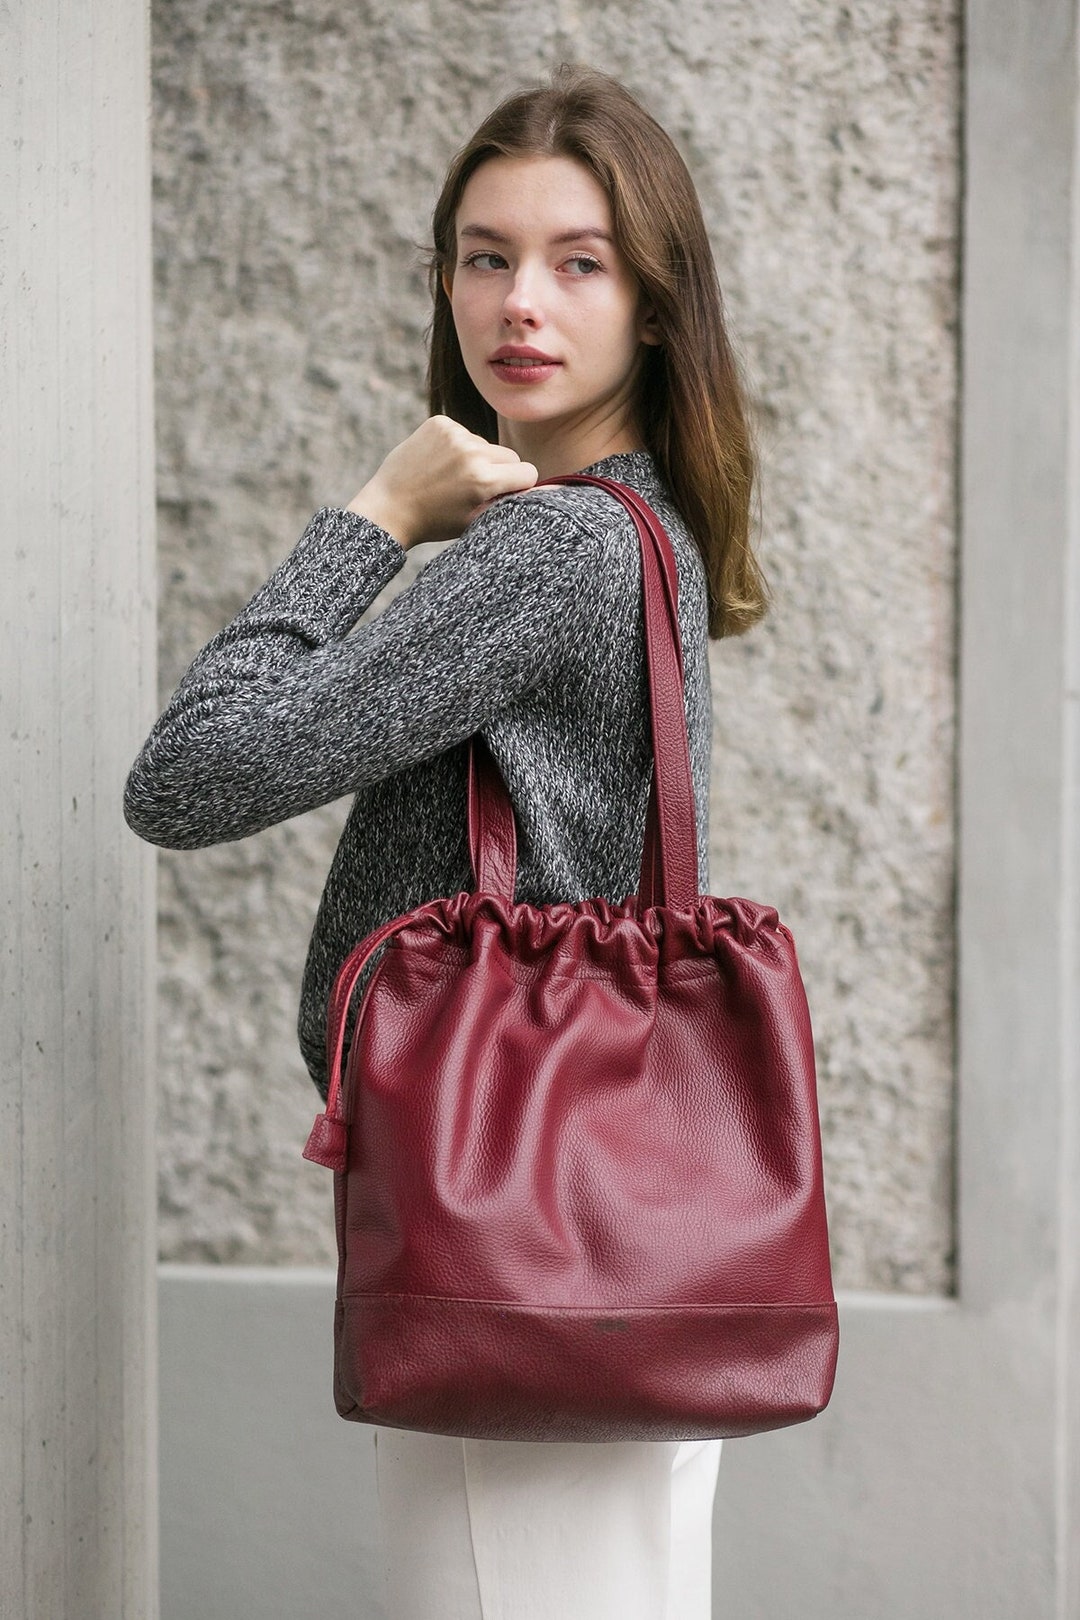 Tote bag in Wine Red leather handmade leather tote bag Etsy 日本